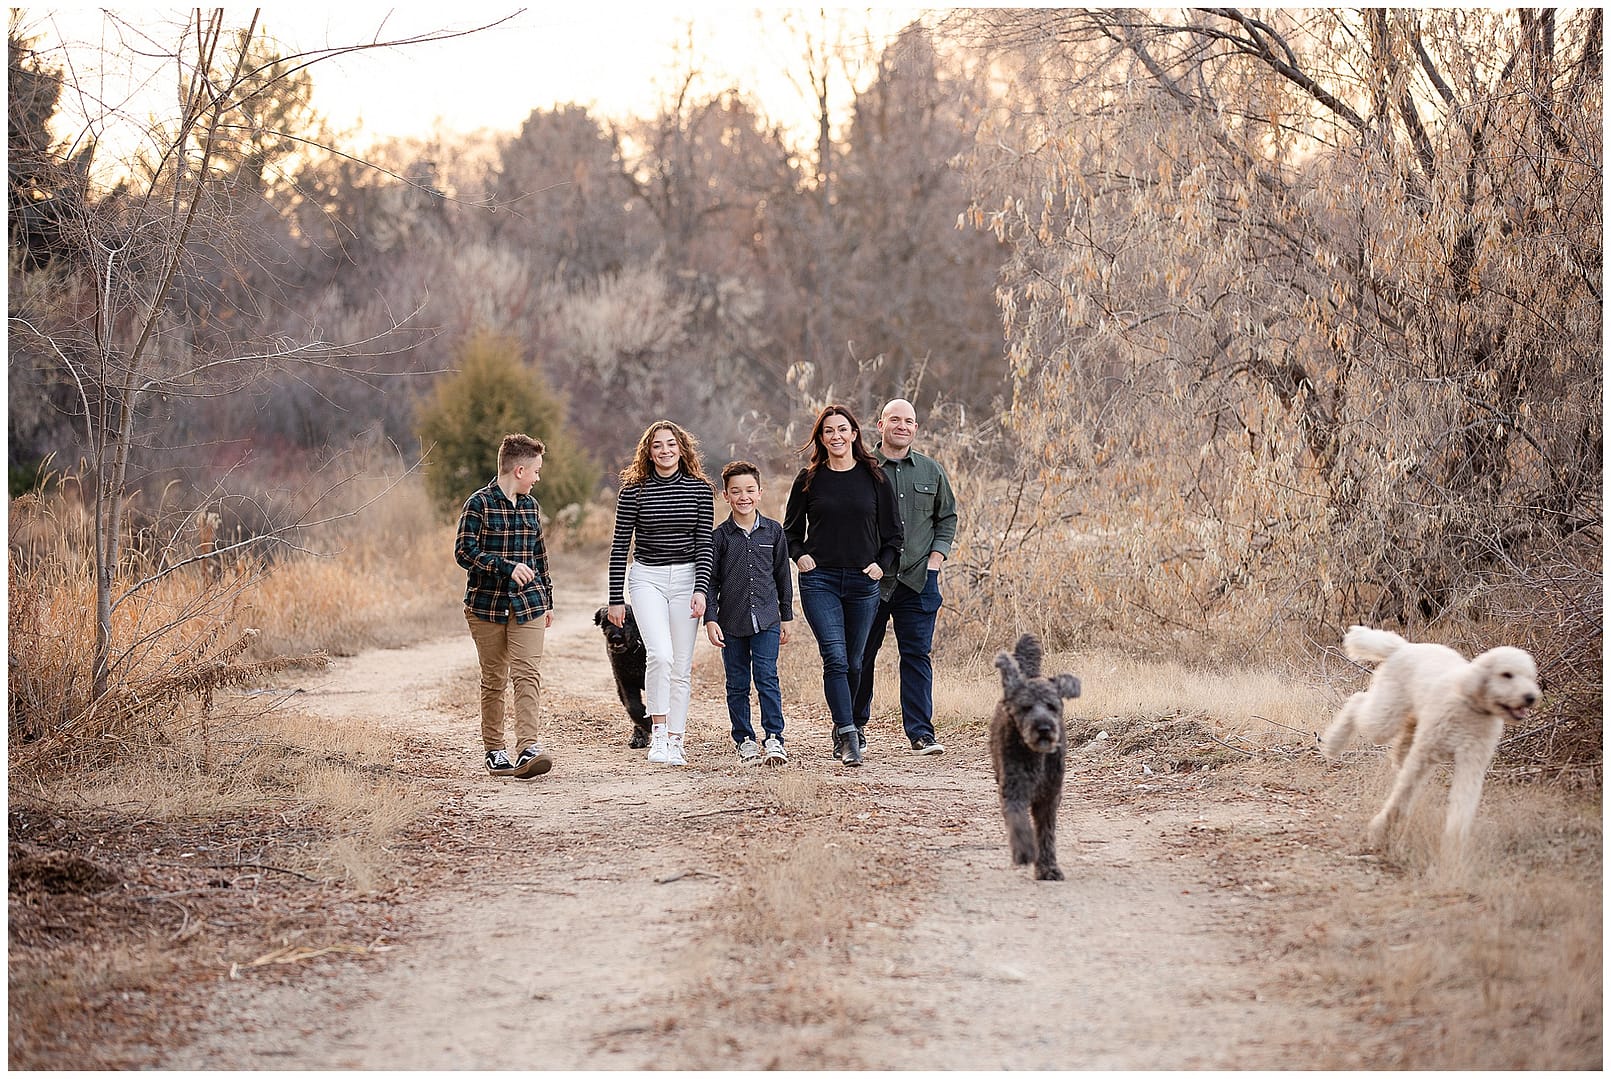 Family walking through park with their three dogs for family photos. Photos by Tiffany Hix Photography.